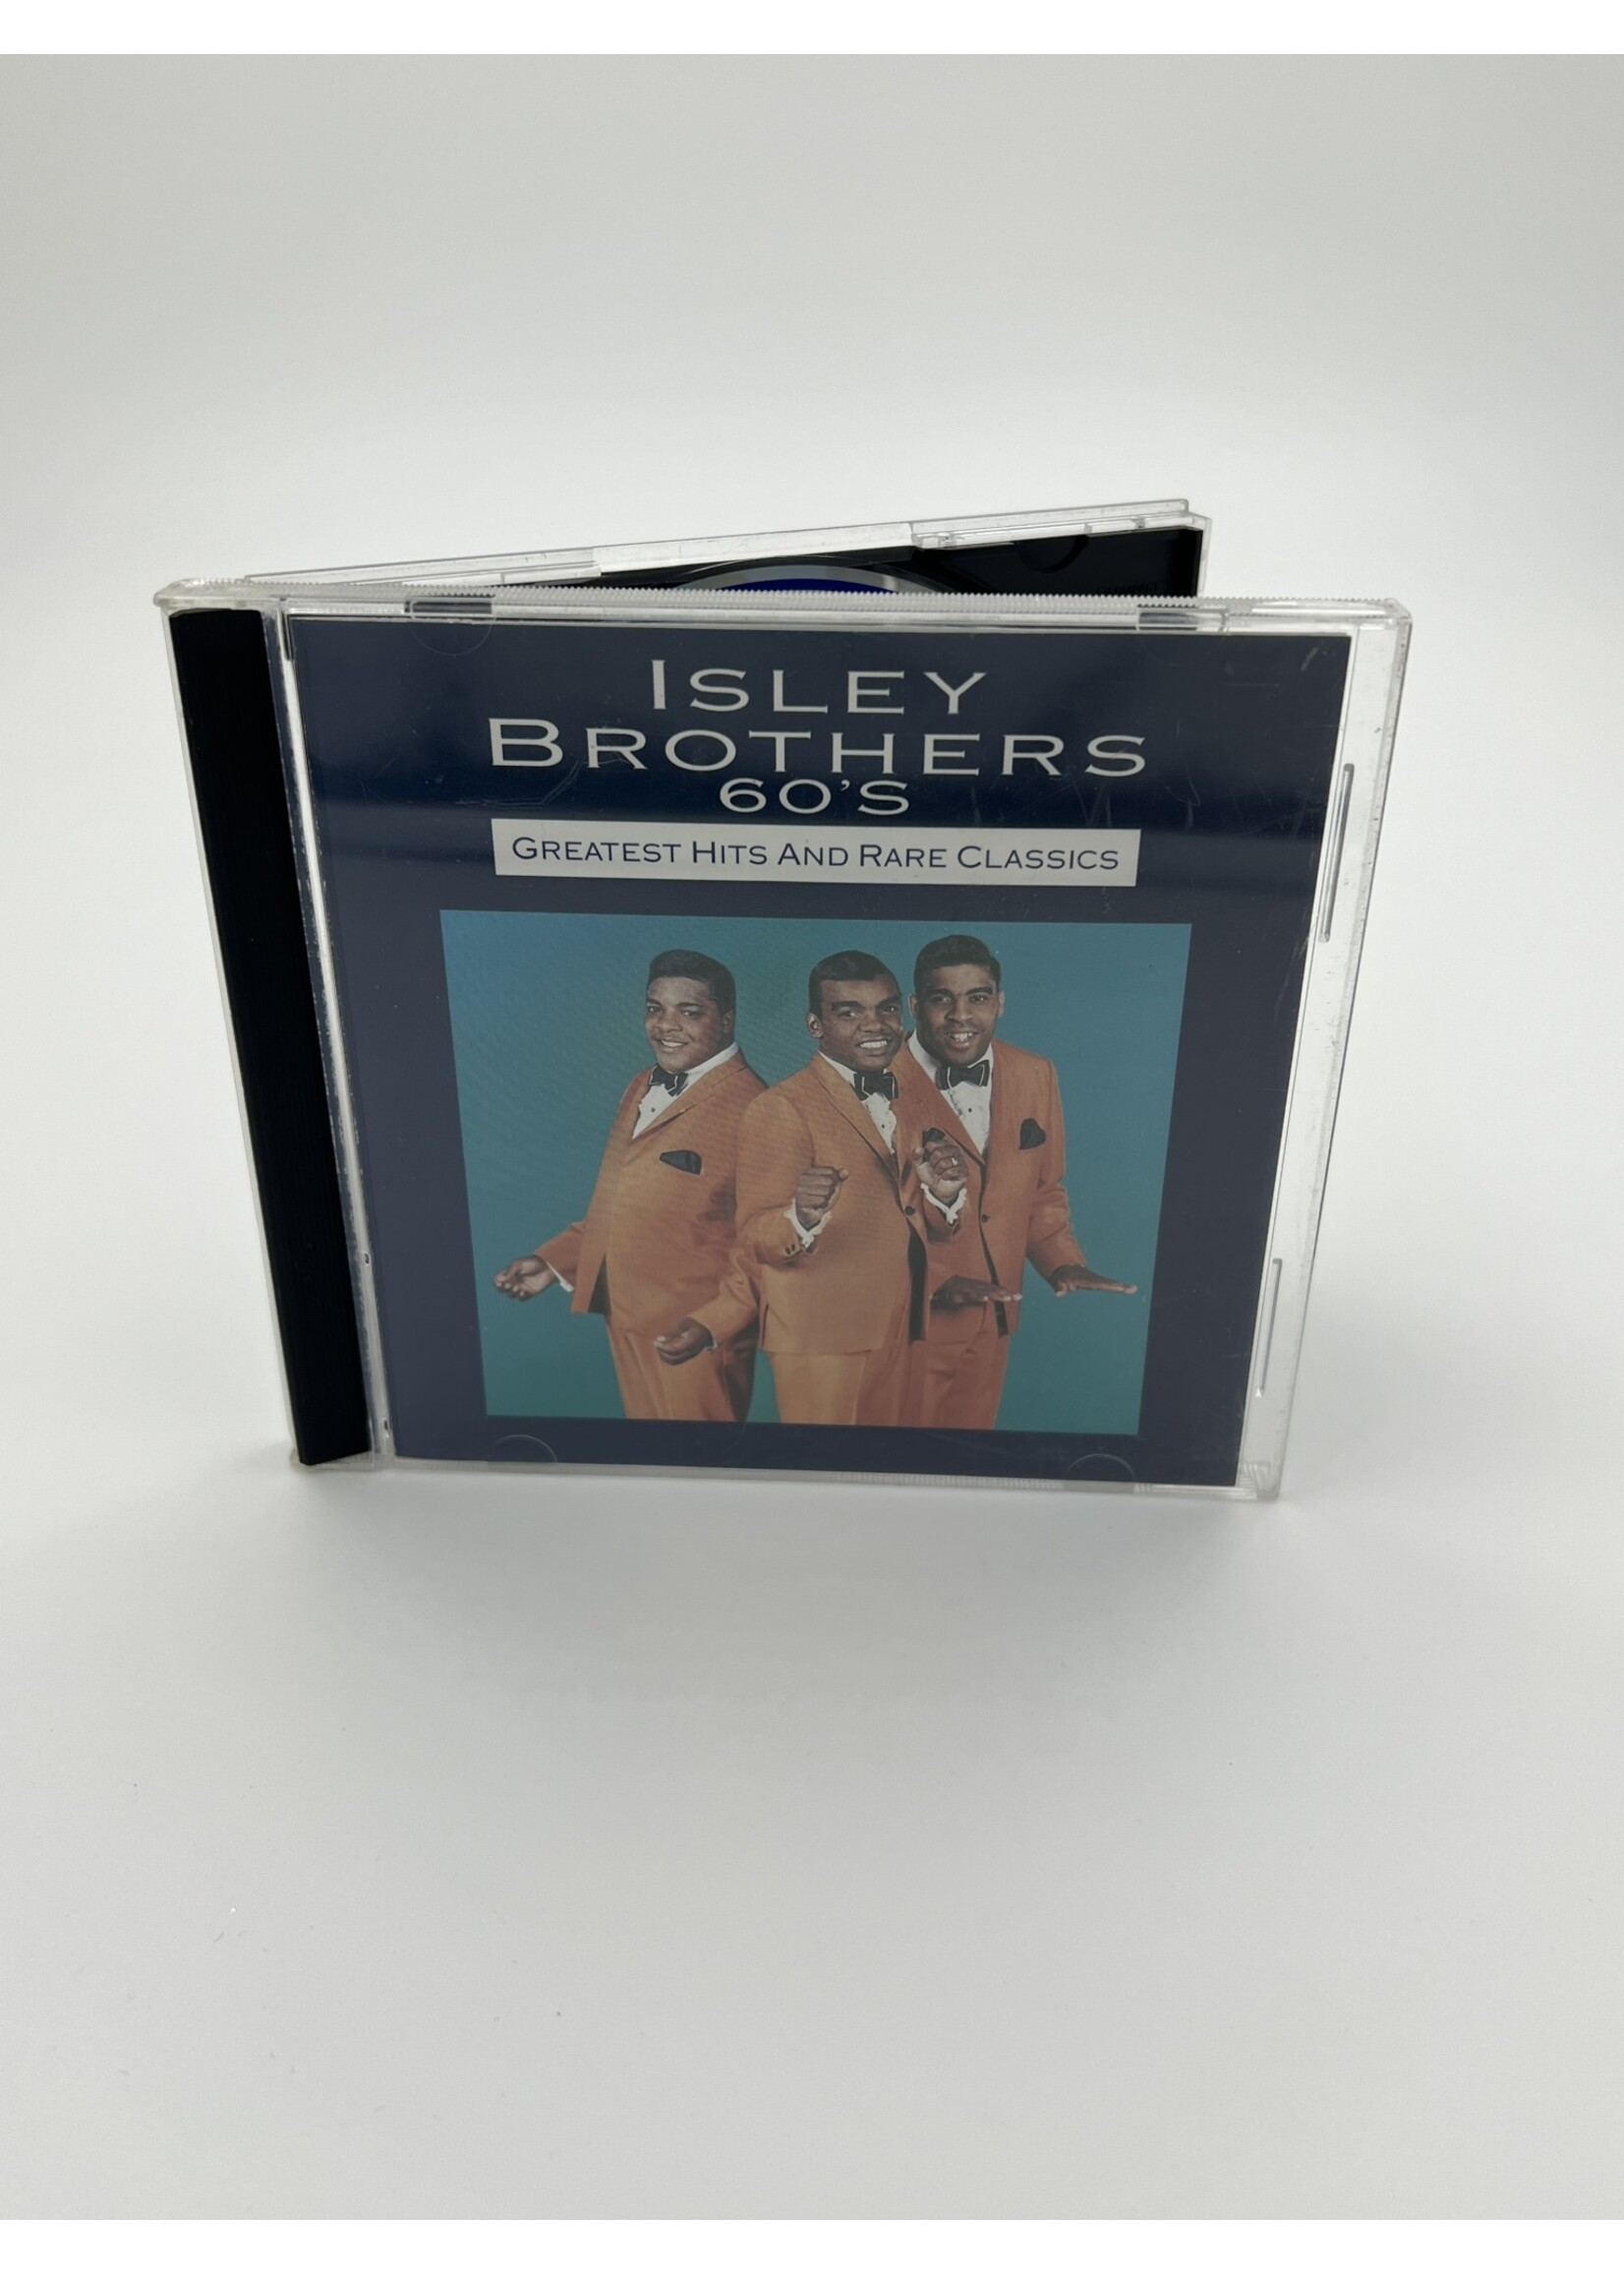 CD   Isley Brothers 60s Greatest Hits And Rare Classics CD